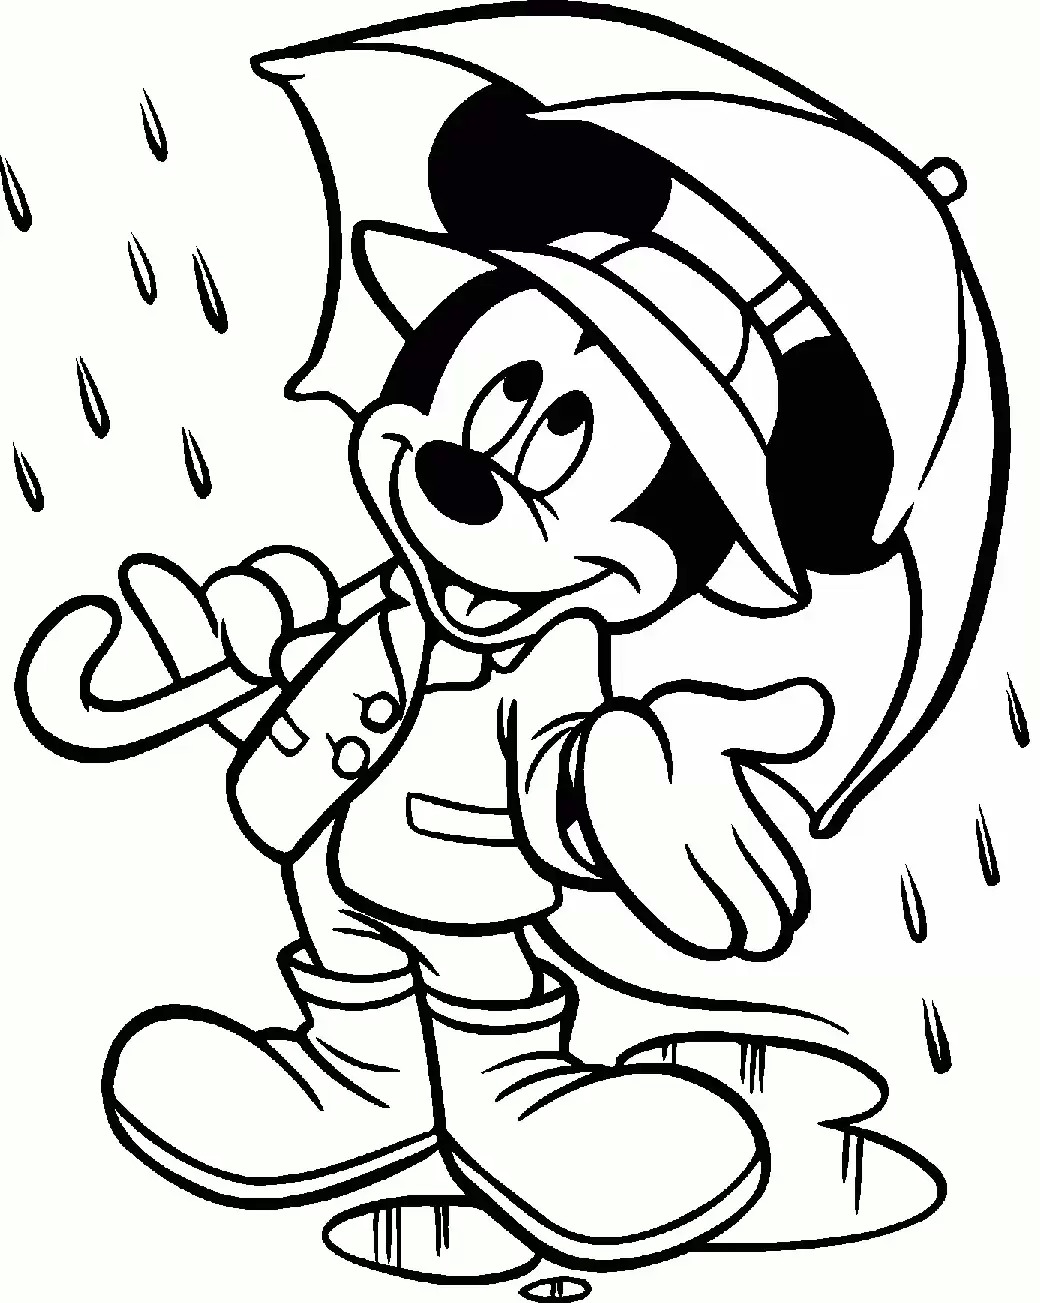 Weather Coloring Pages For Preschool at GetDrawings   Free download